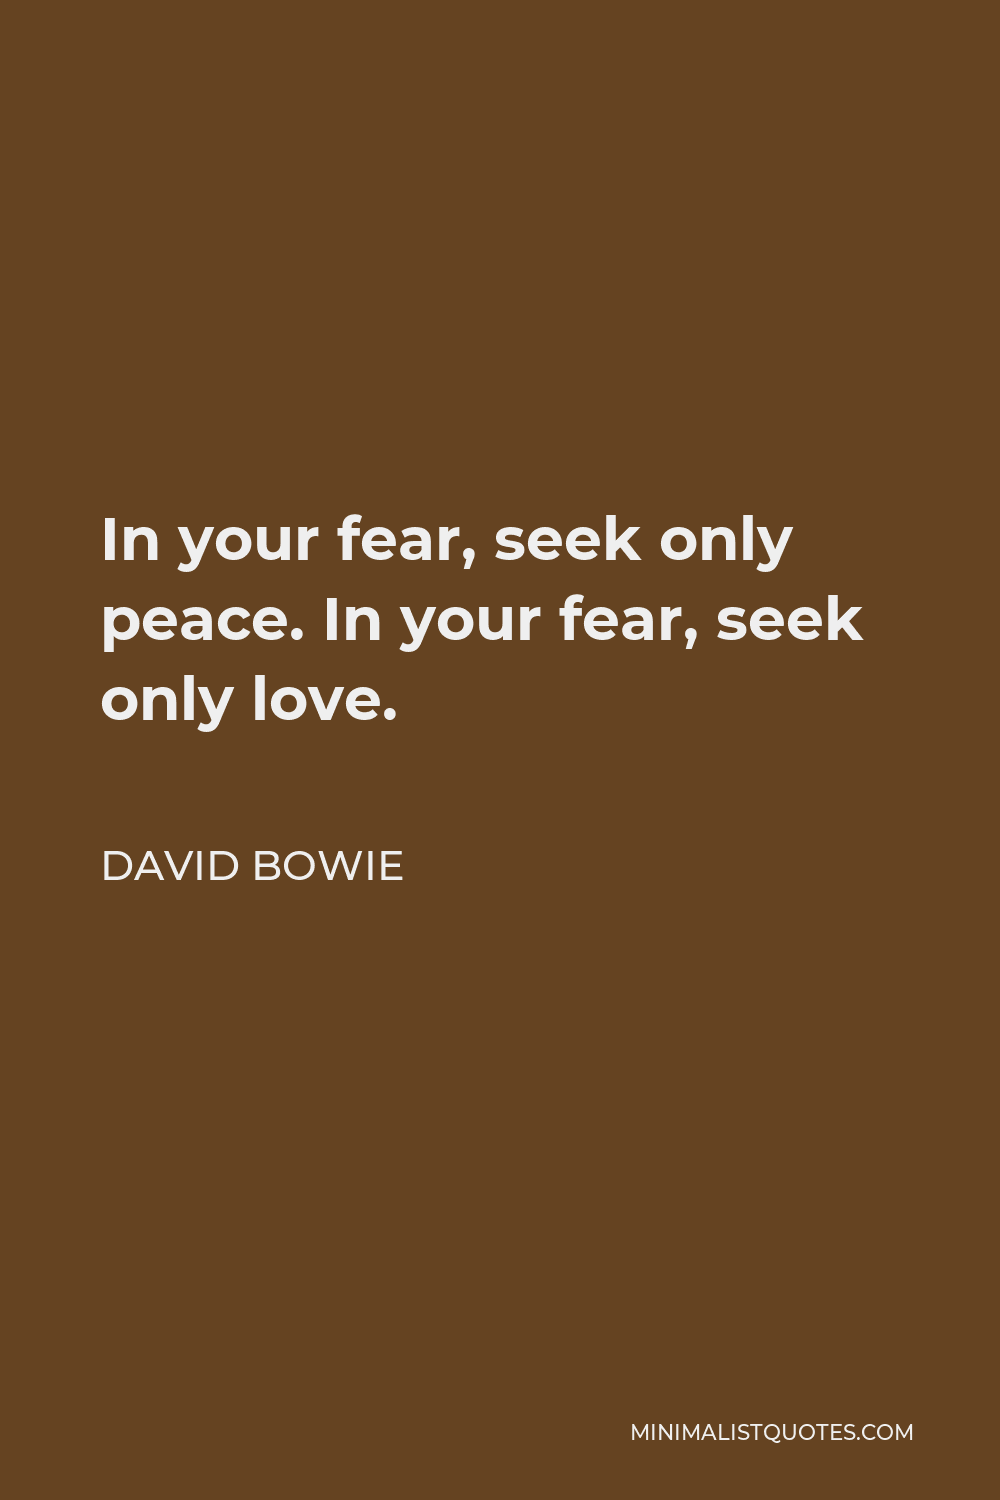 David Bowie Quote - In your fear, seek only peace. In your fear, seek only love.